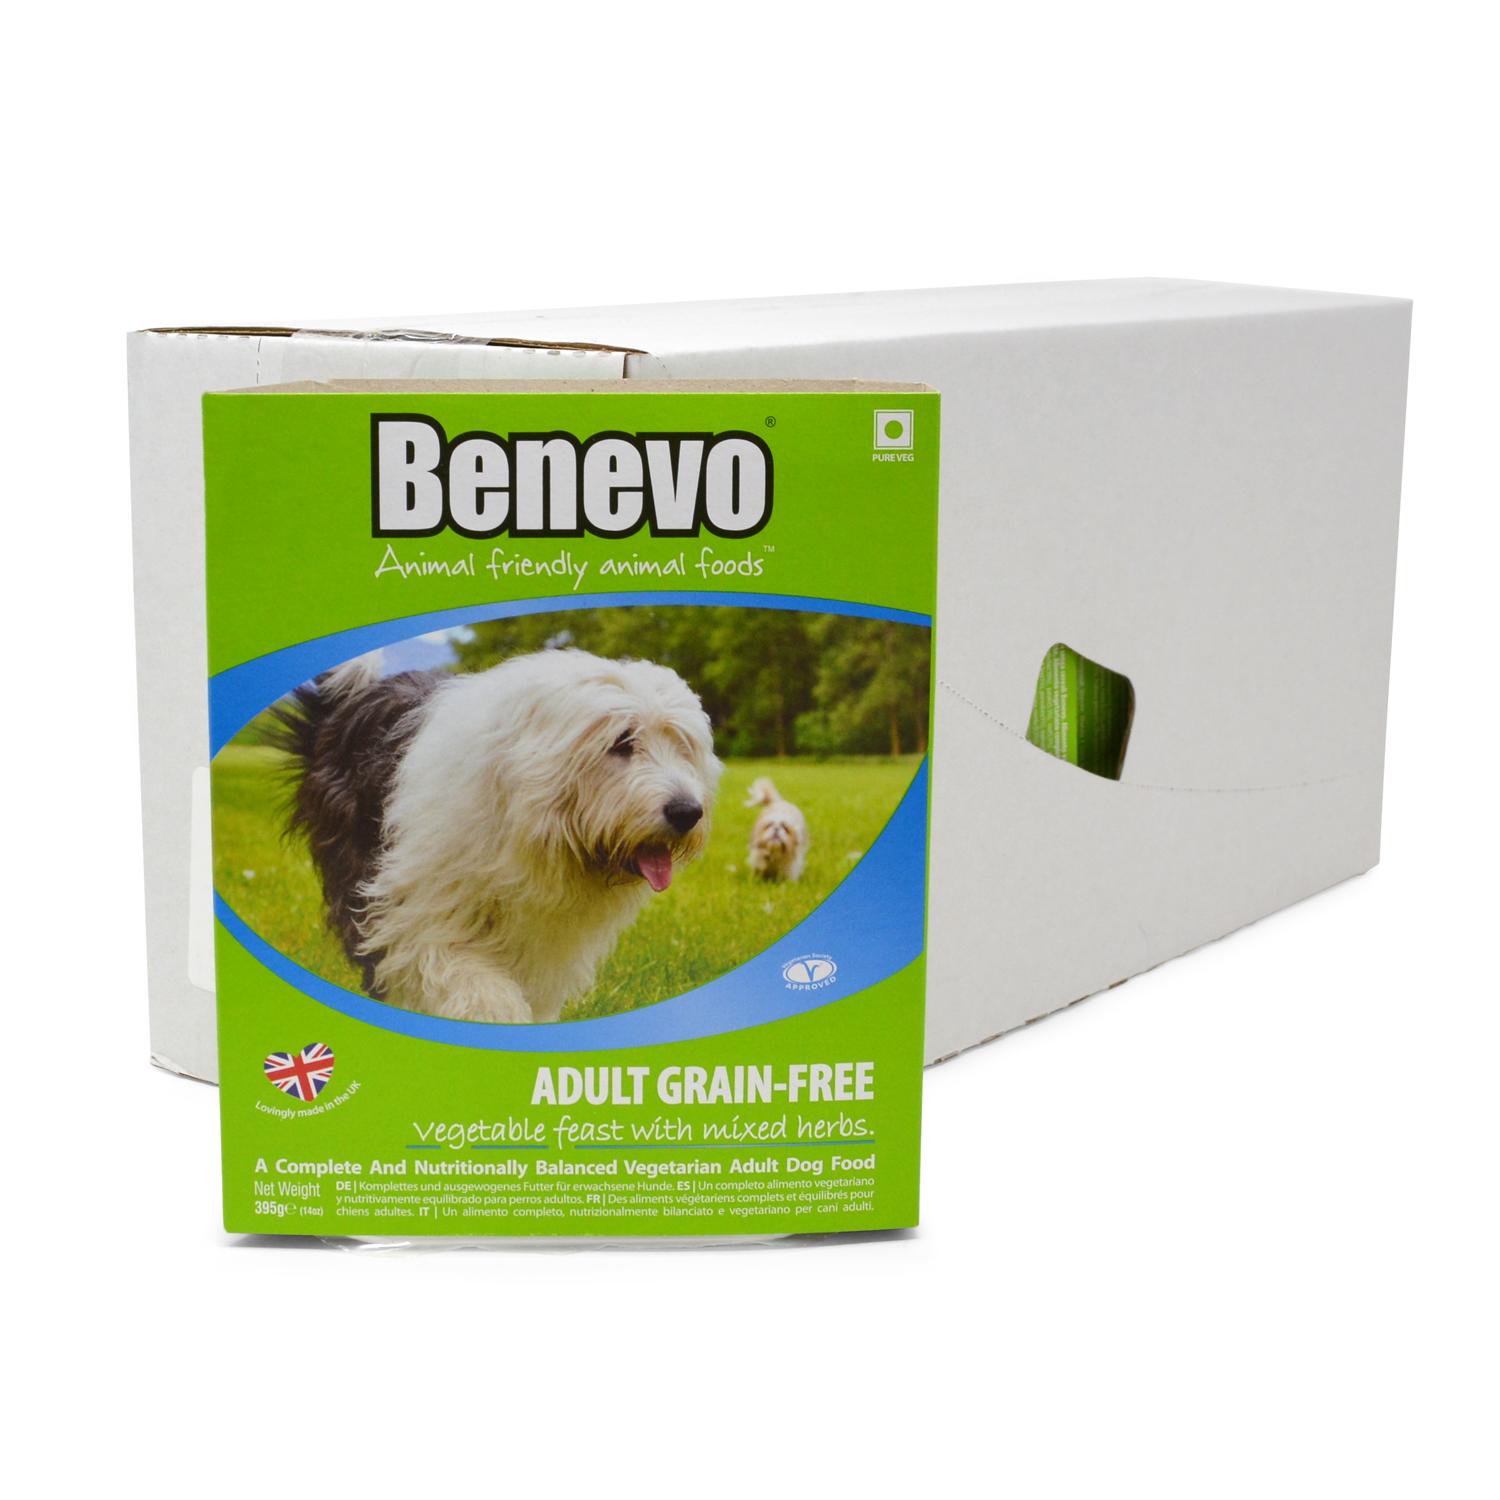 A pack of Benevo Grain Free Vegetable Feast vegan dog food in front of a white case